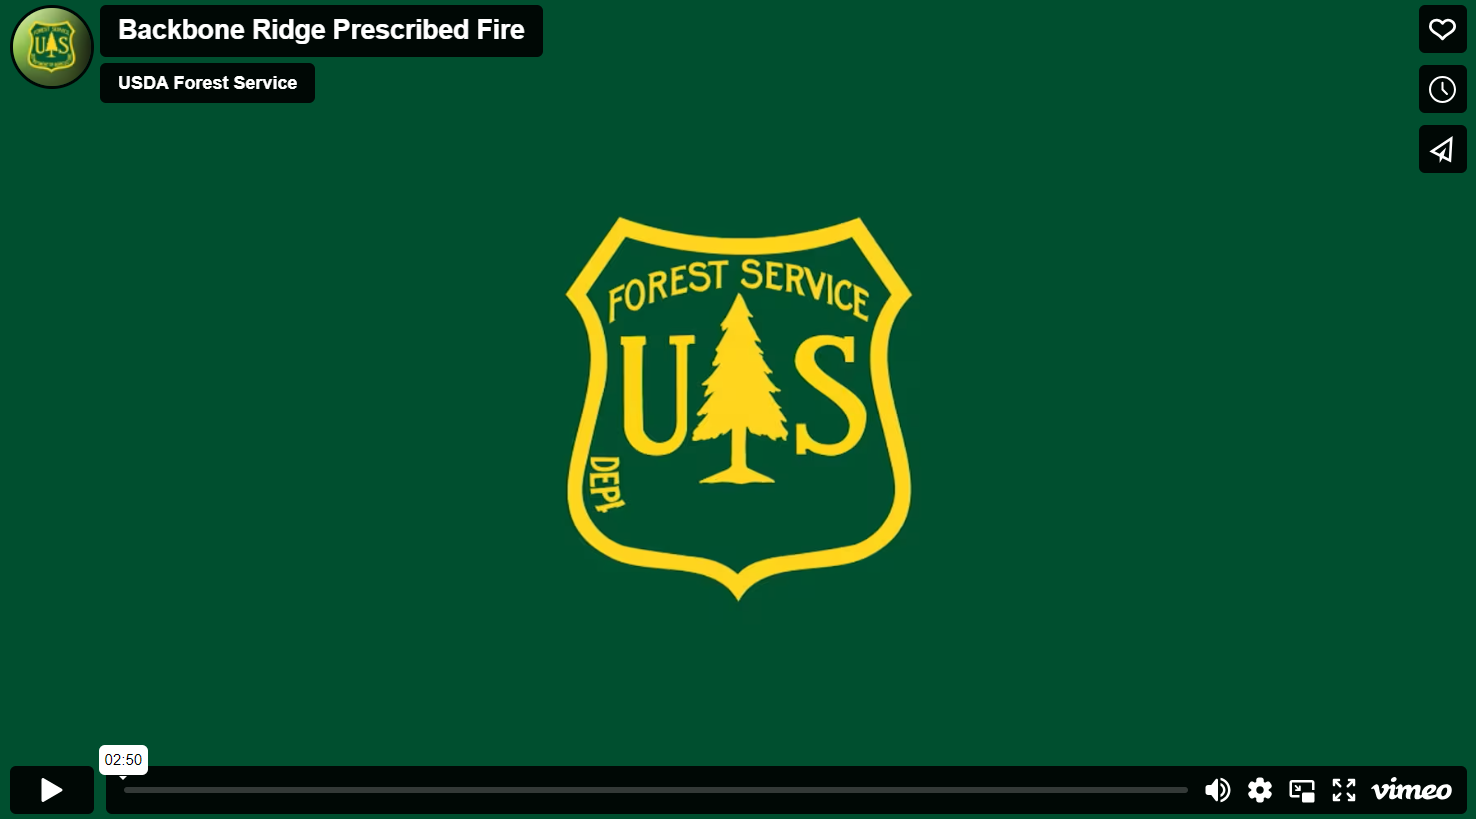 Video player for Forest News Episode 24 on the topic of Backbone Ridge Prescribed Fire